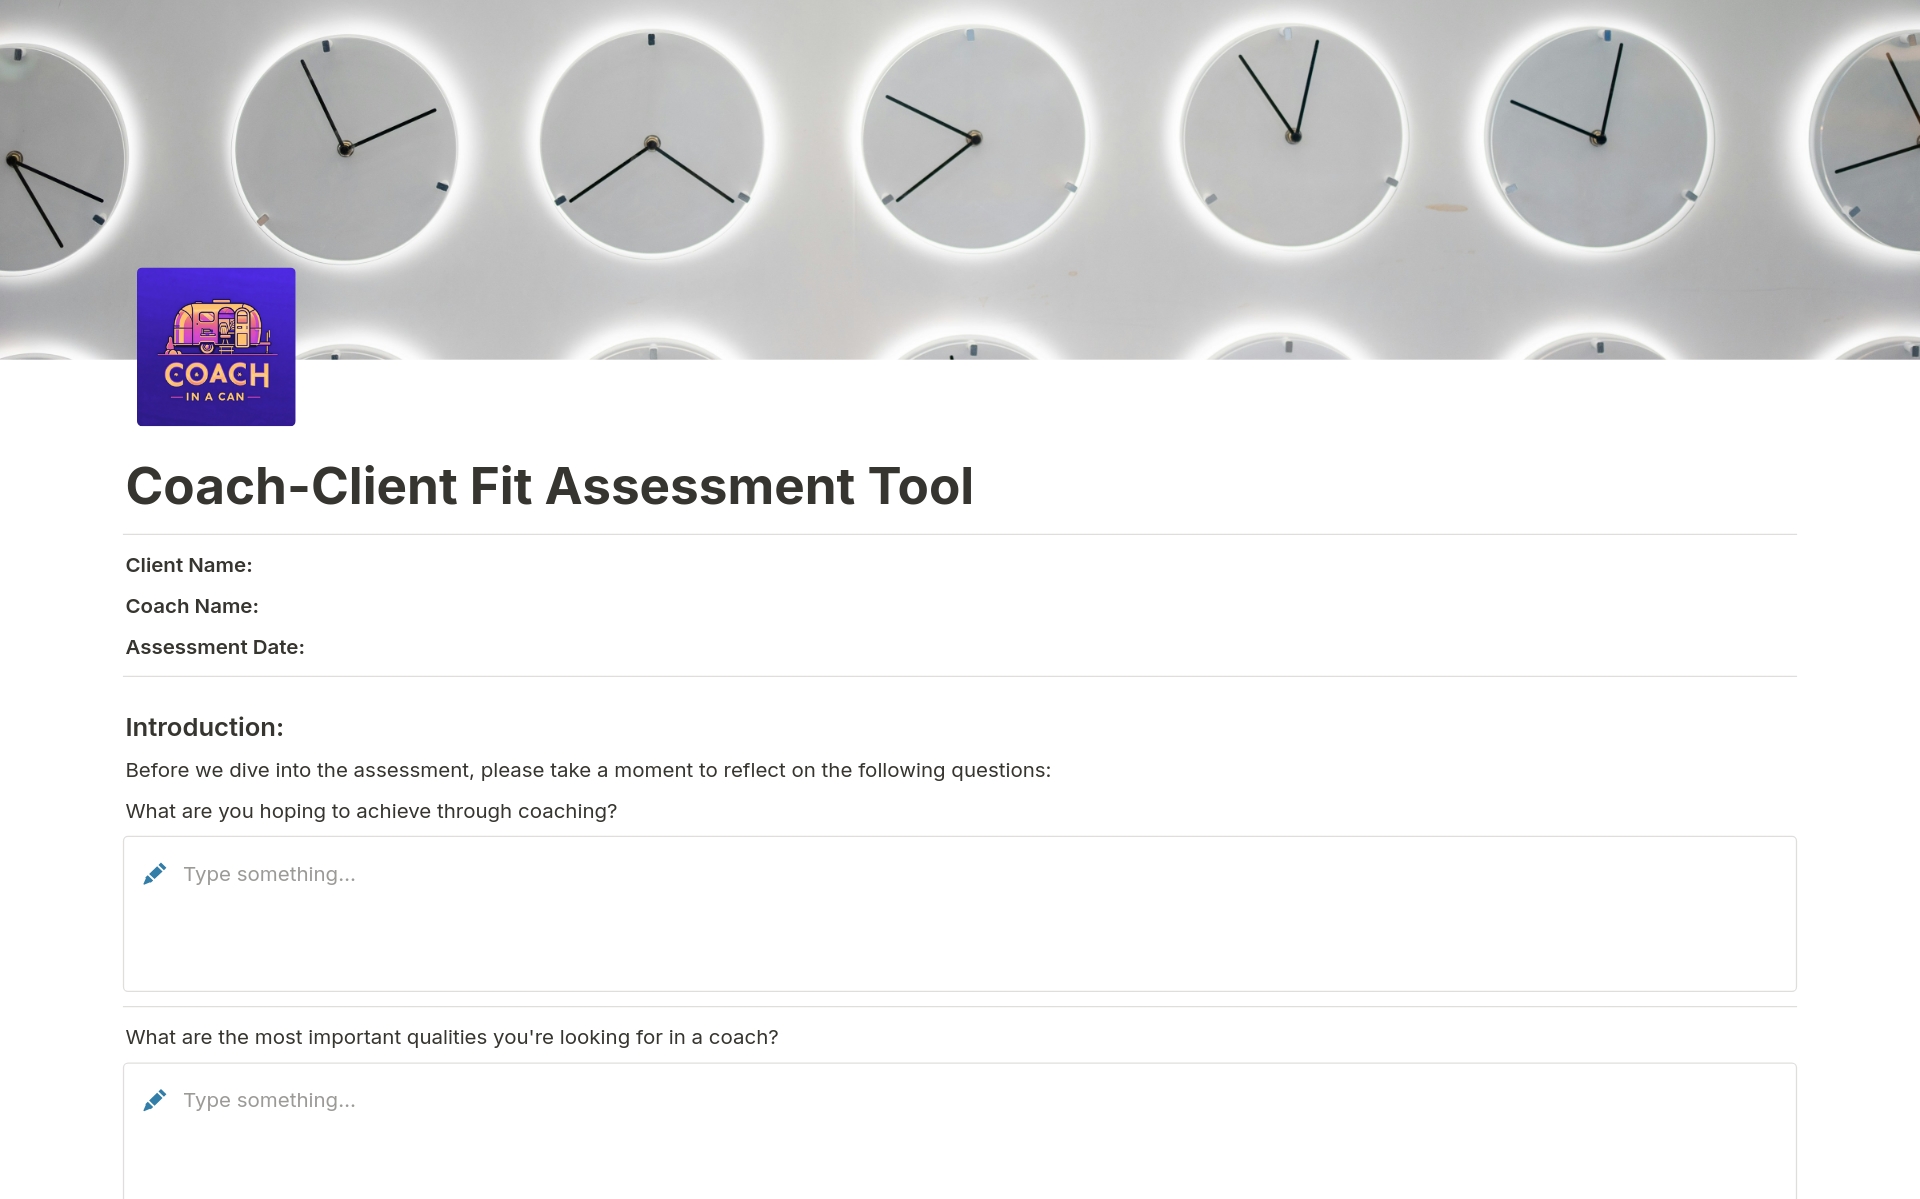 New coach? Our Coach-Client Fit Assessment Tool helps you find the perfect client match. Evaluate compatibility across key areas like personality, values, and coaching style. Enhance your coaching effectiveness and build stronger client relationships with this template.